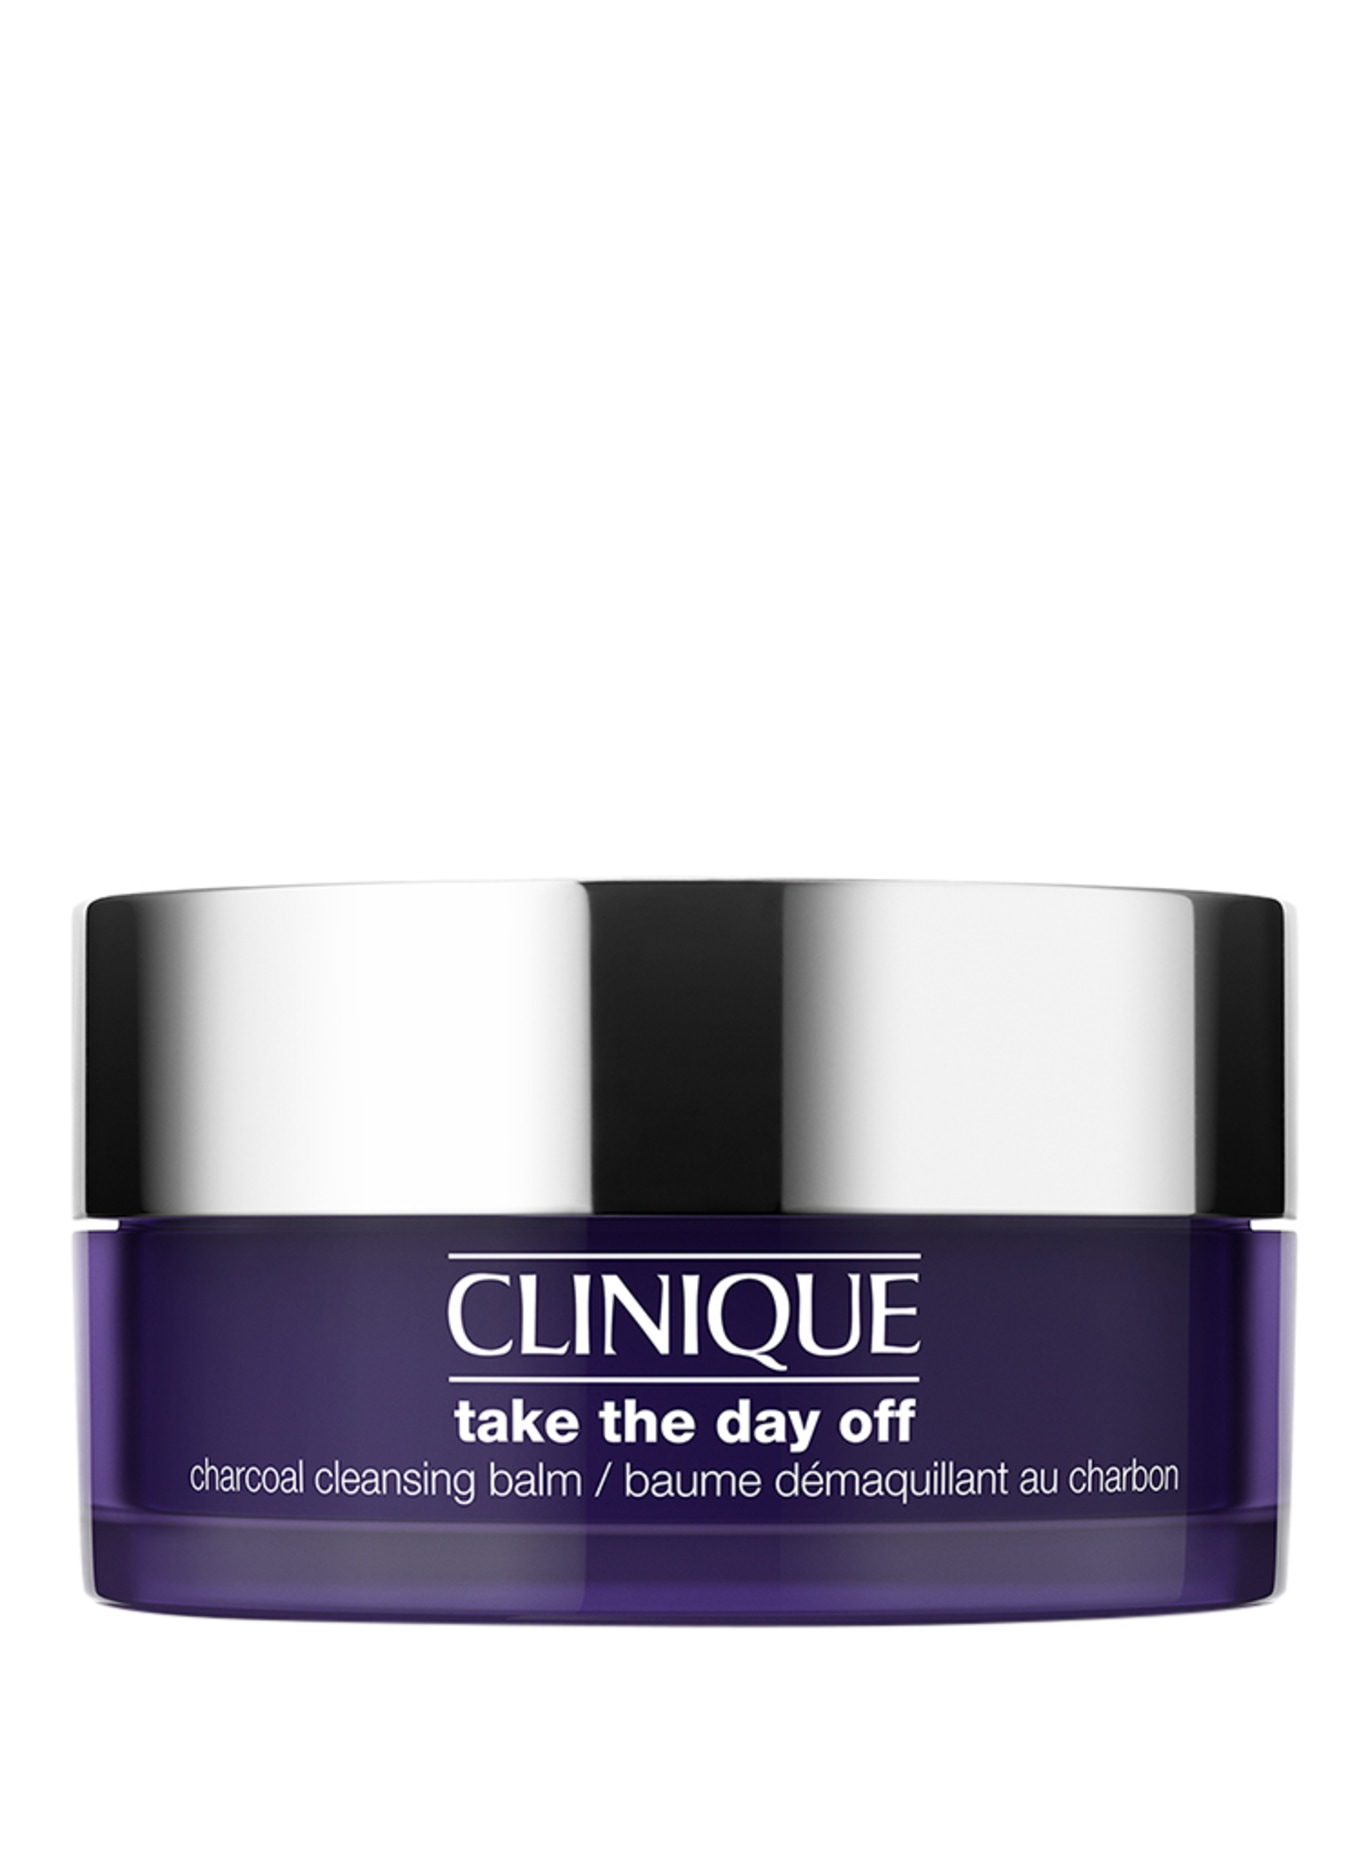 CLINIQUE TAKE THE DAY OFF CHARCOAL CLEANSING BALM (Bild 1)